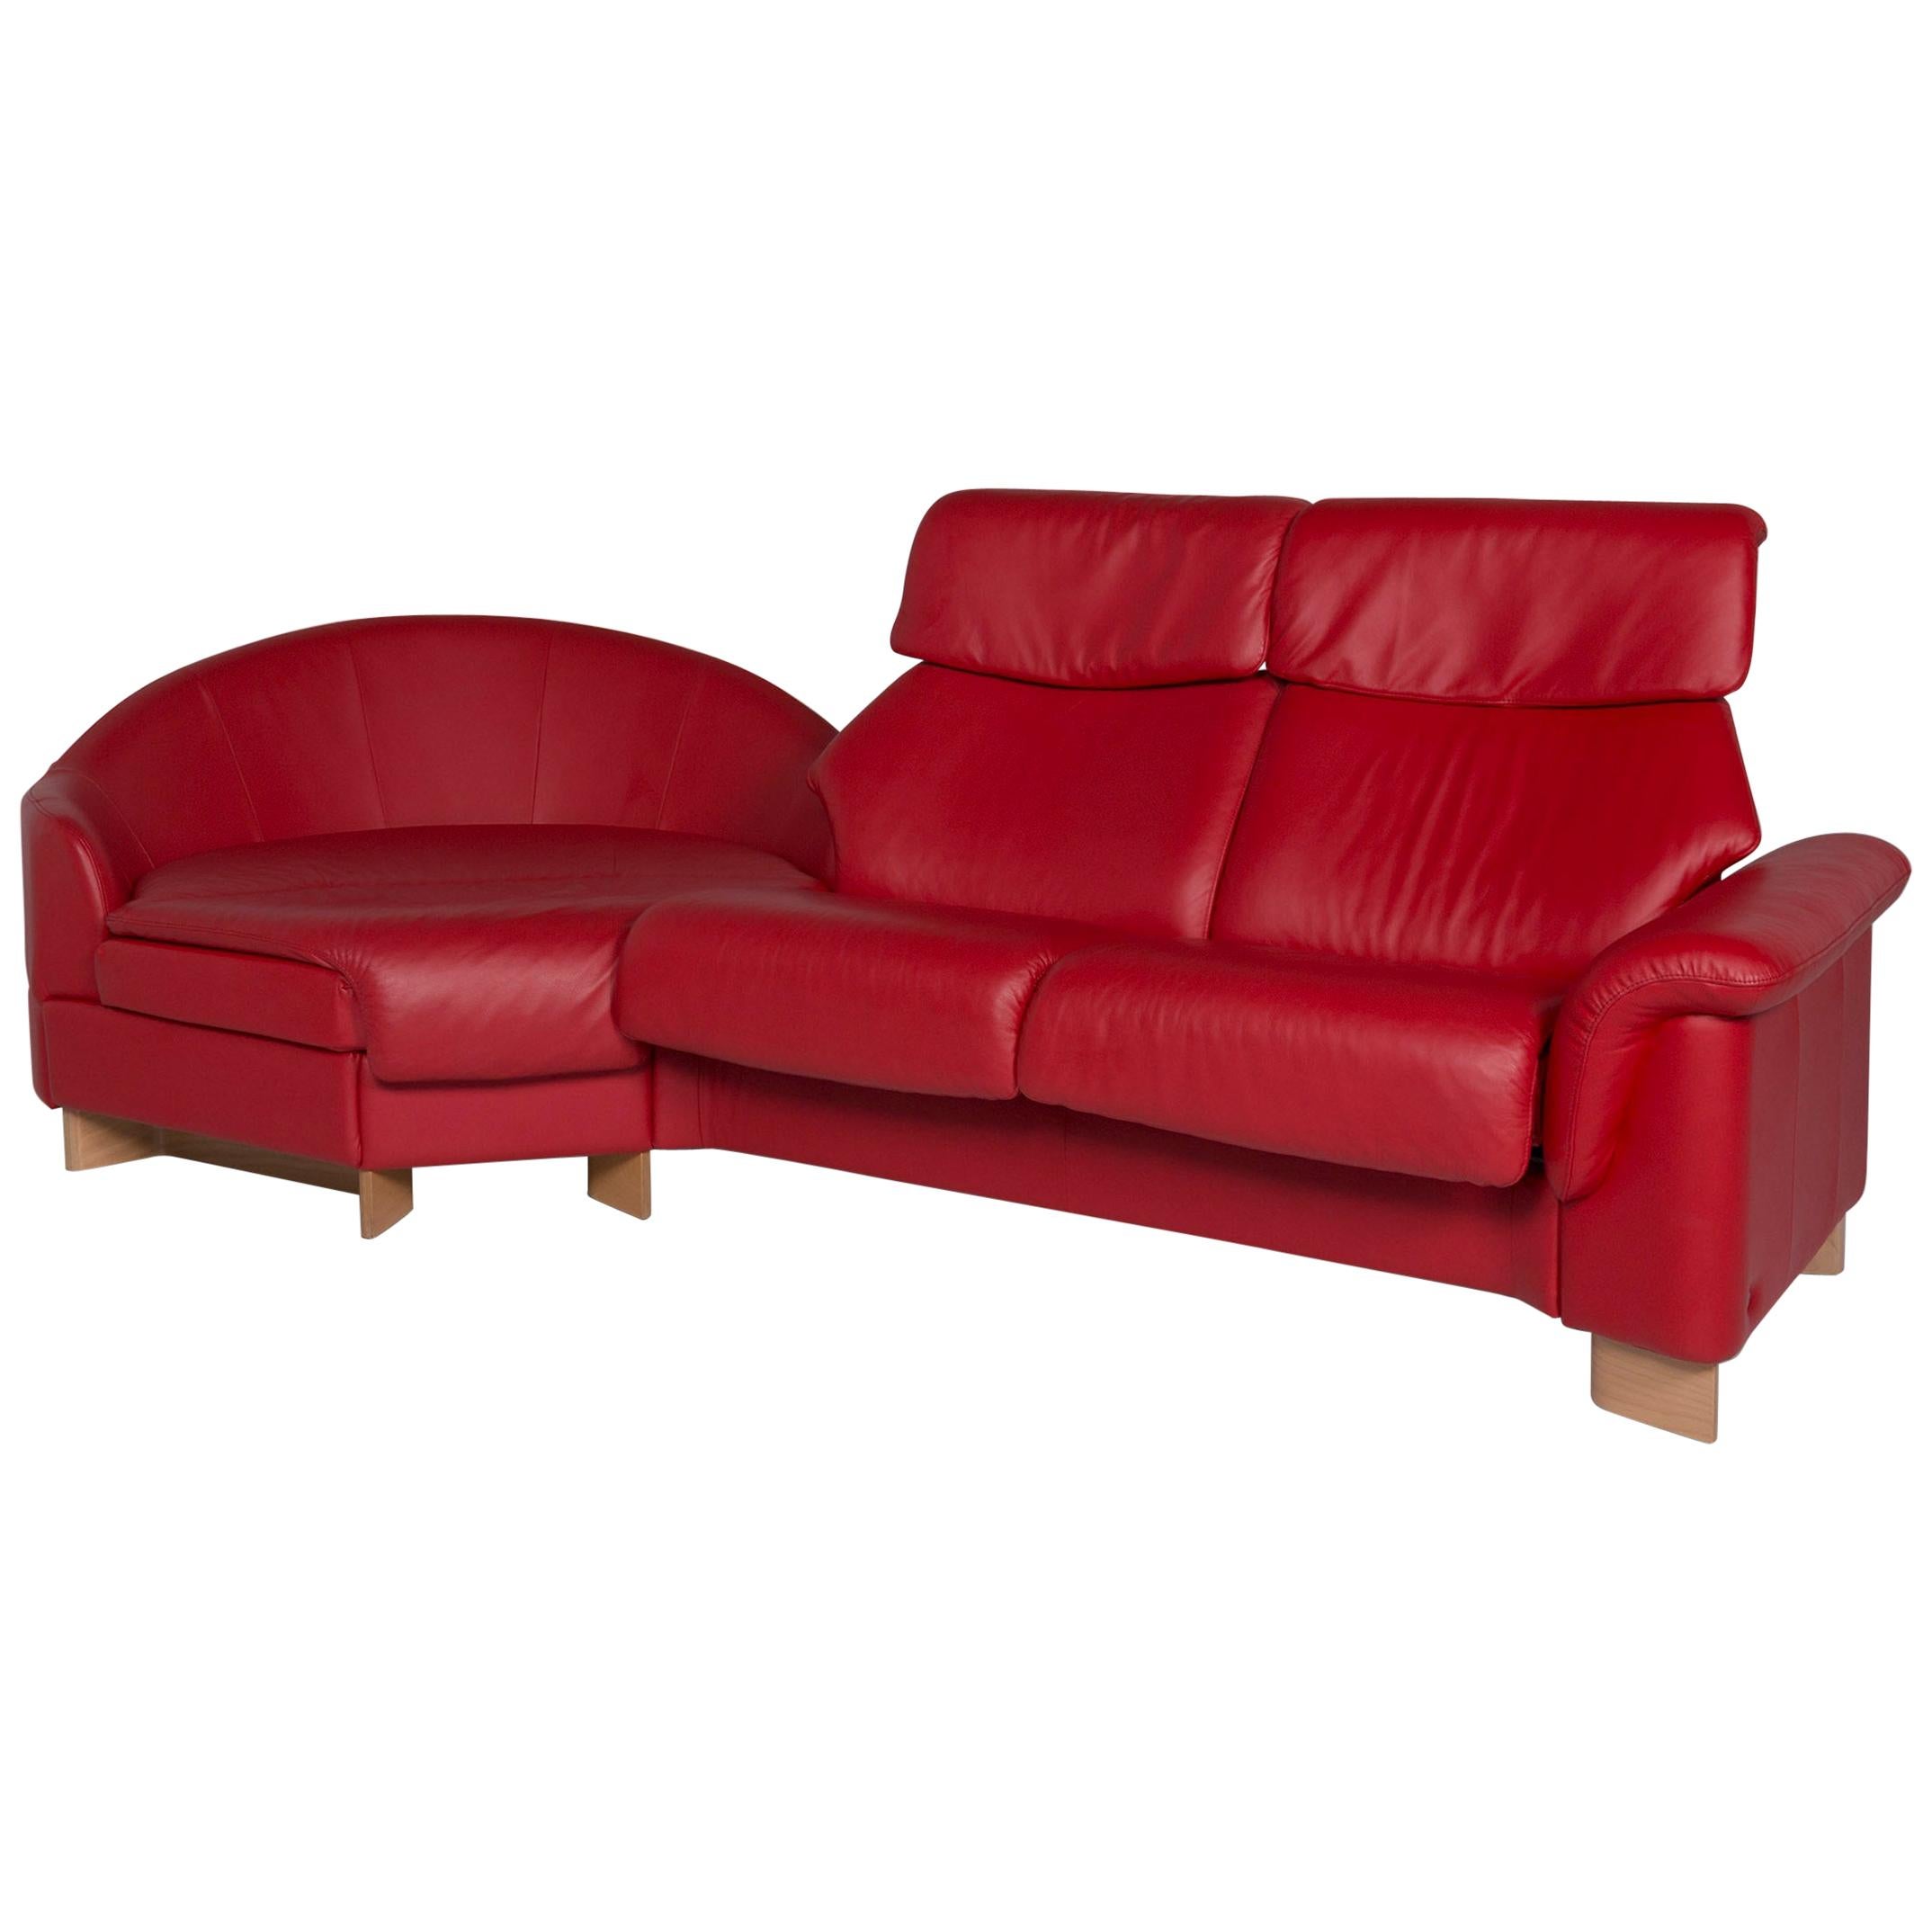 Stressless Leather Sofa Red Corner Sofa For Sale